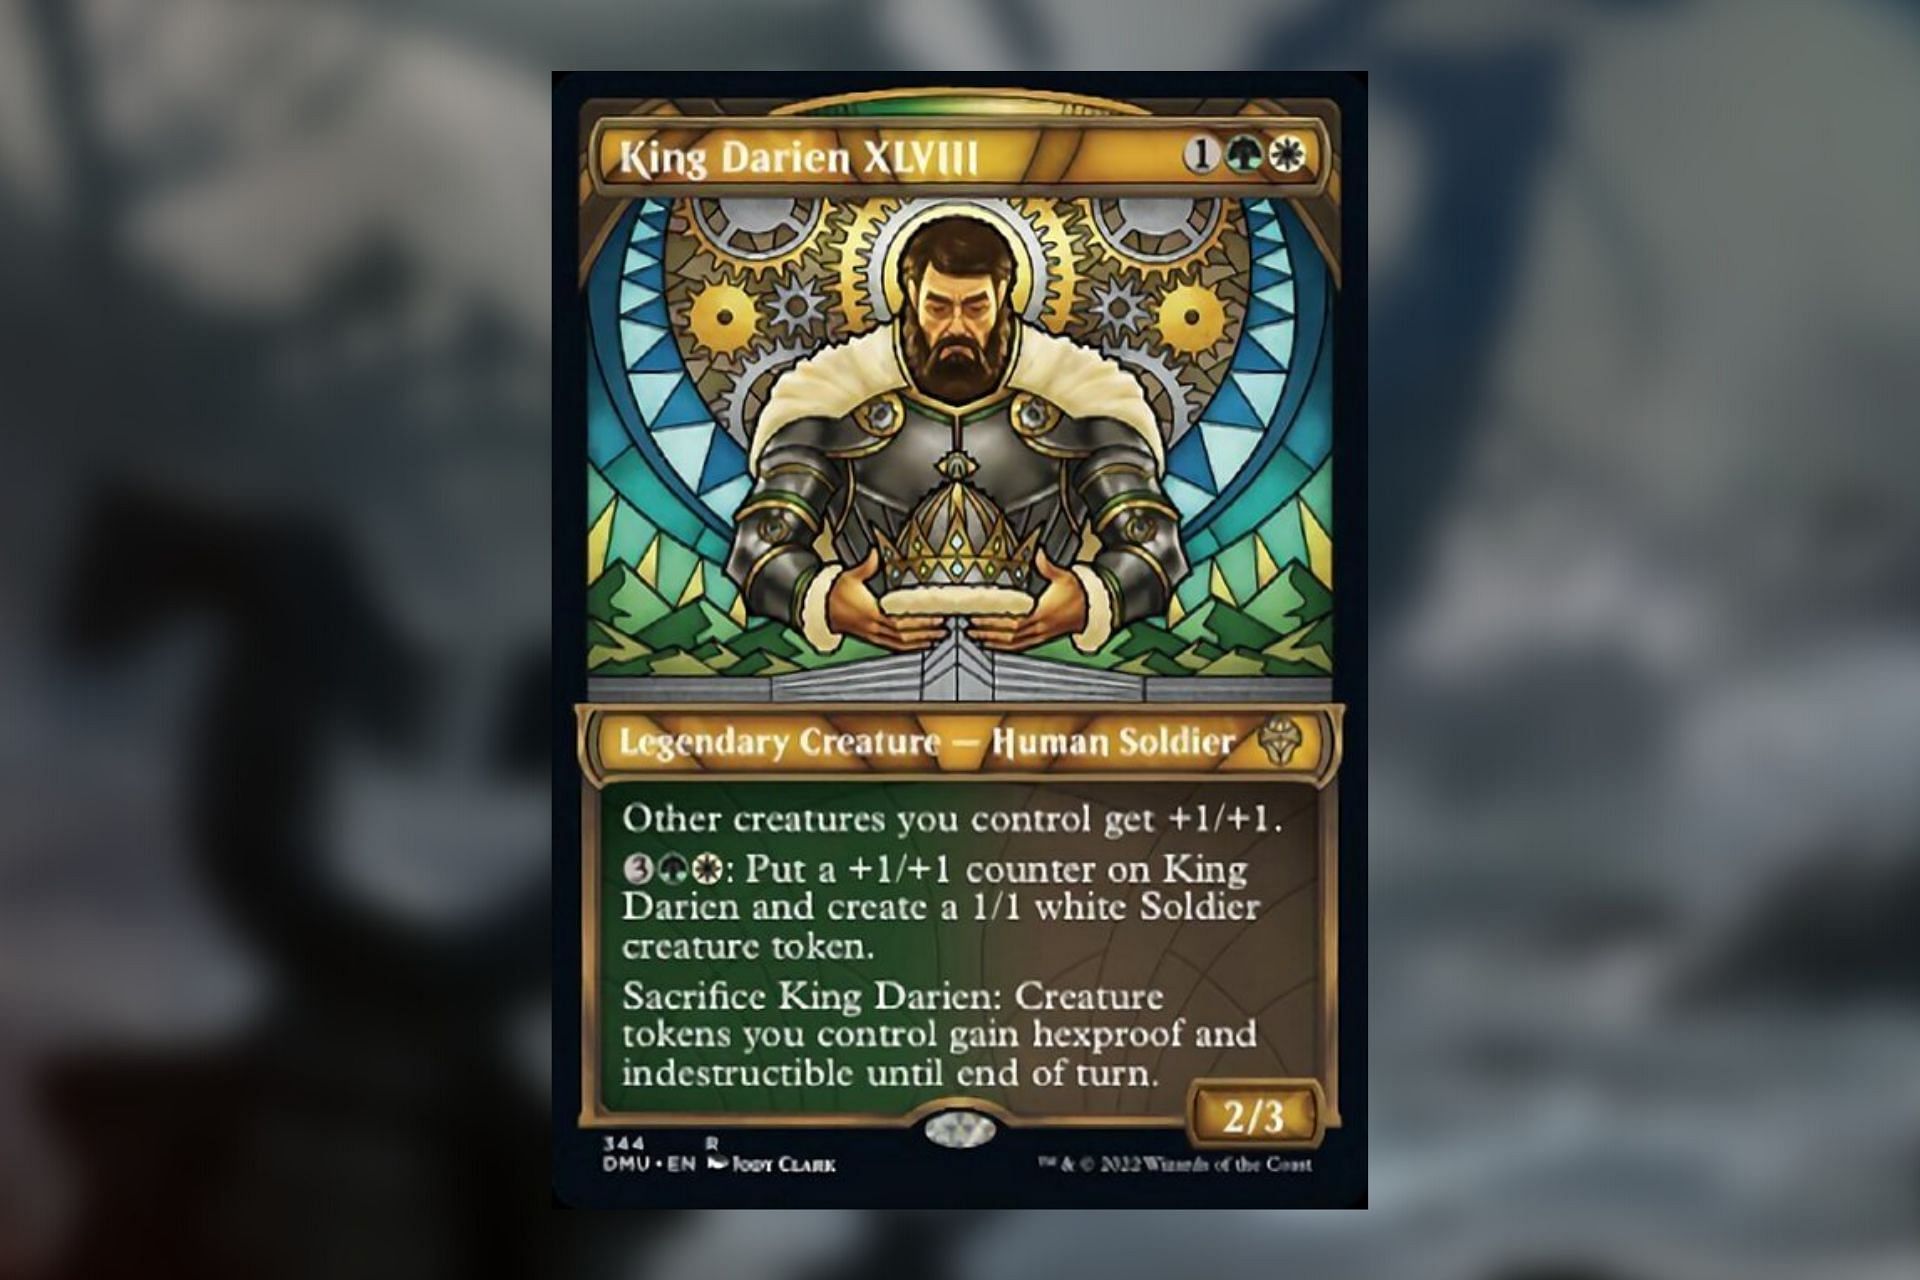 Magic: The Gathering&#039;s King Darion XLVIII brings power and stability to token creature decks (Image via Wizards of the Coast)